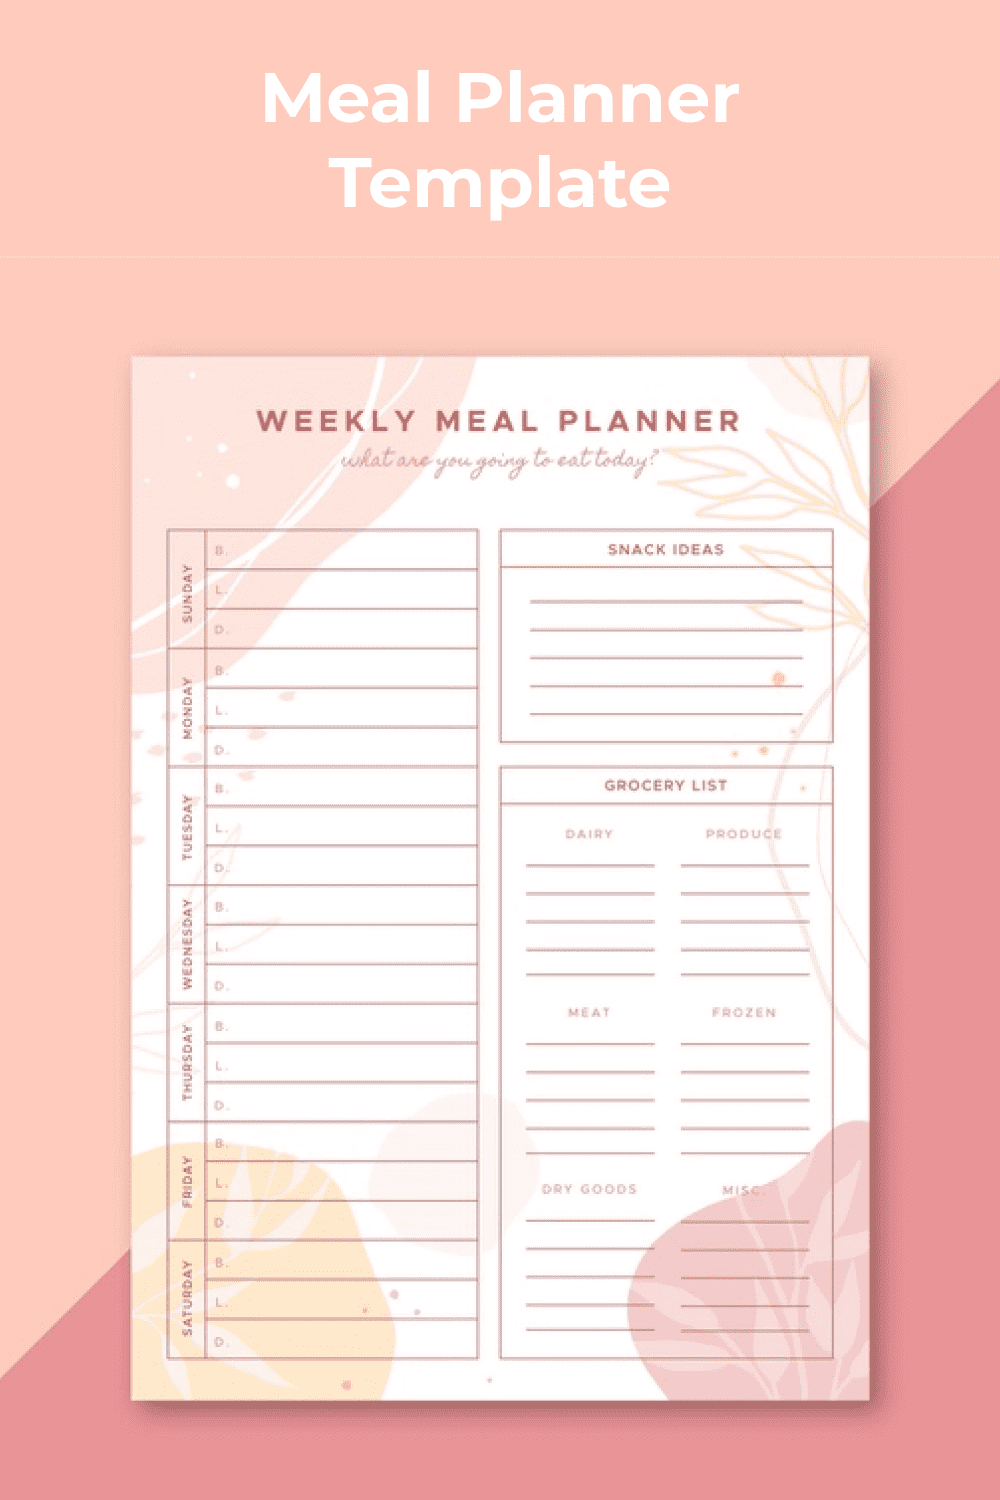 A girly option in pink for meal planning.